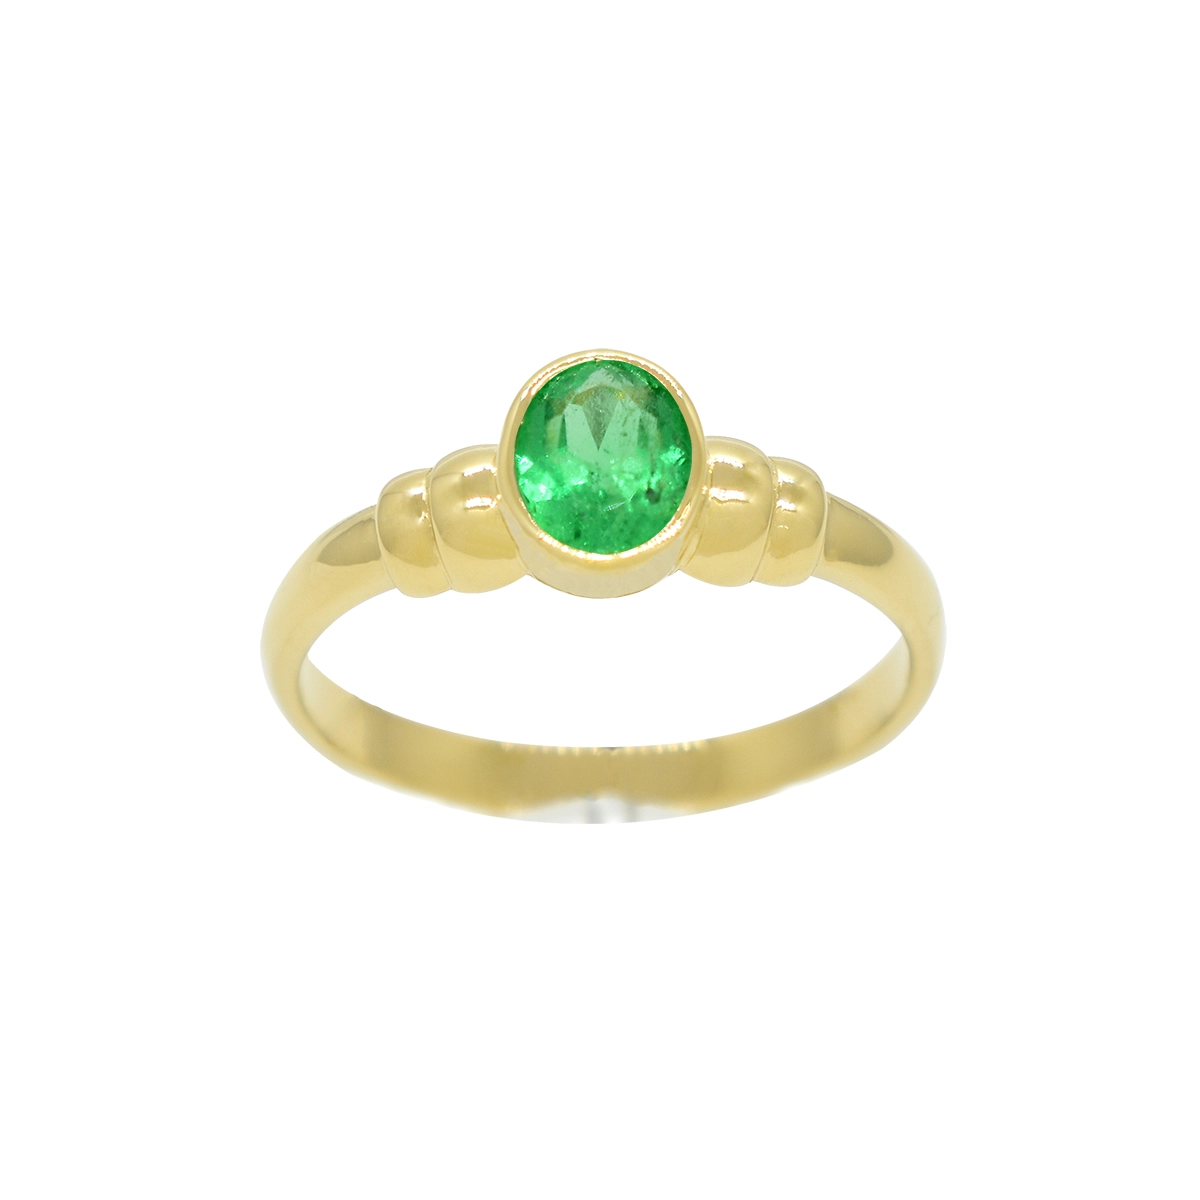 Oval Shape Solitaire Emerald Ring in 18K Yellow Gold Bezel Setting